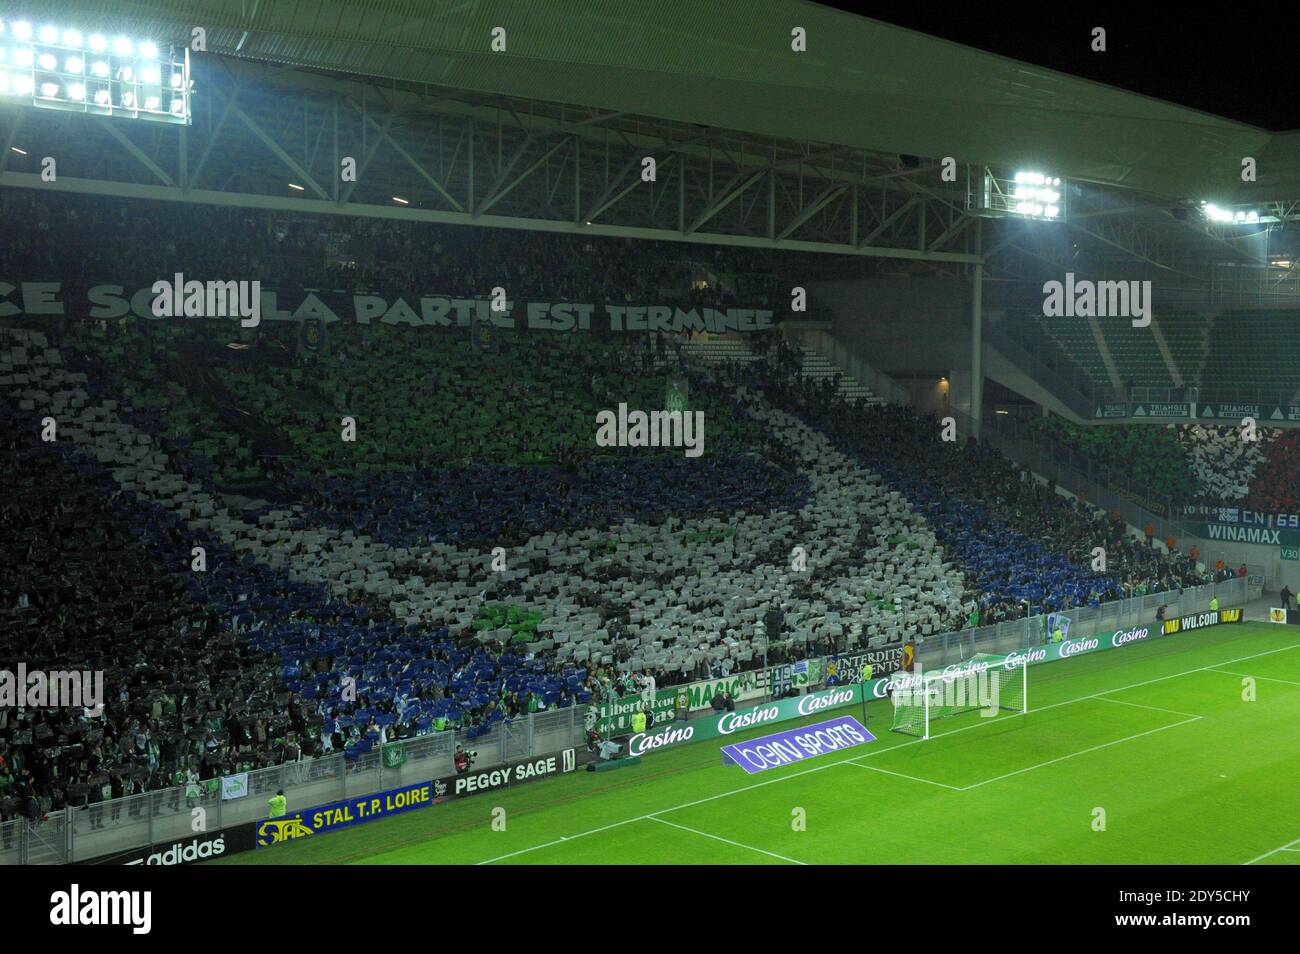 supporters during Europa league soccer match, Saint Etienne vs Inter Milan in Geoffroy Guichard stadium, Saint Etienne, France, on November 6, 2014. Photo by Philipe Montigny/ABACAPRESS.COM Stock Photo